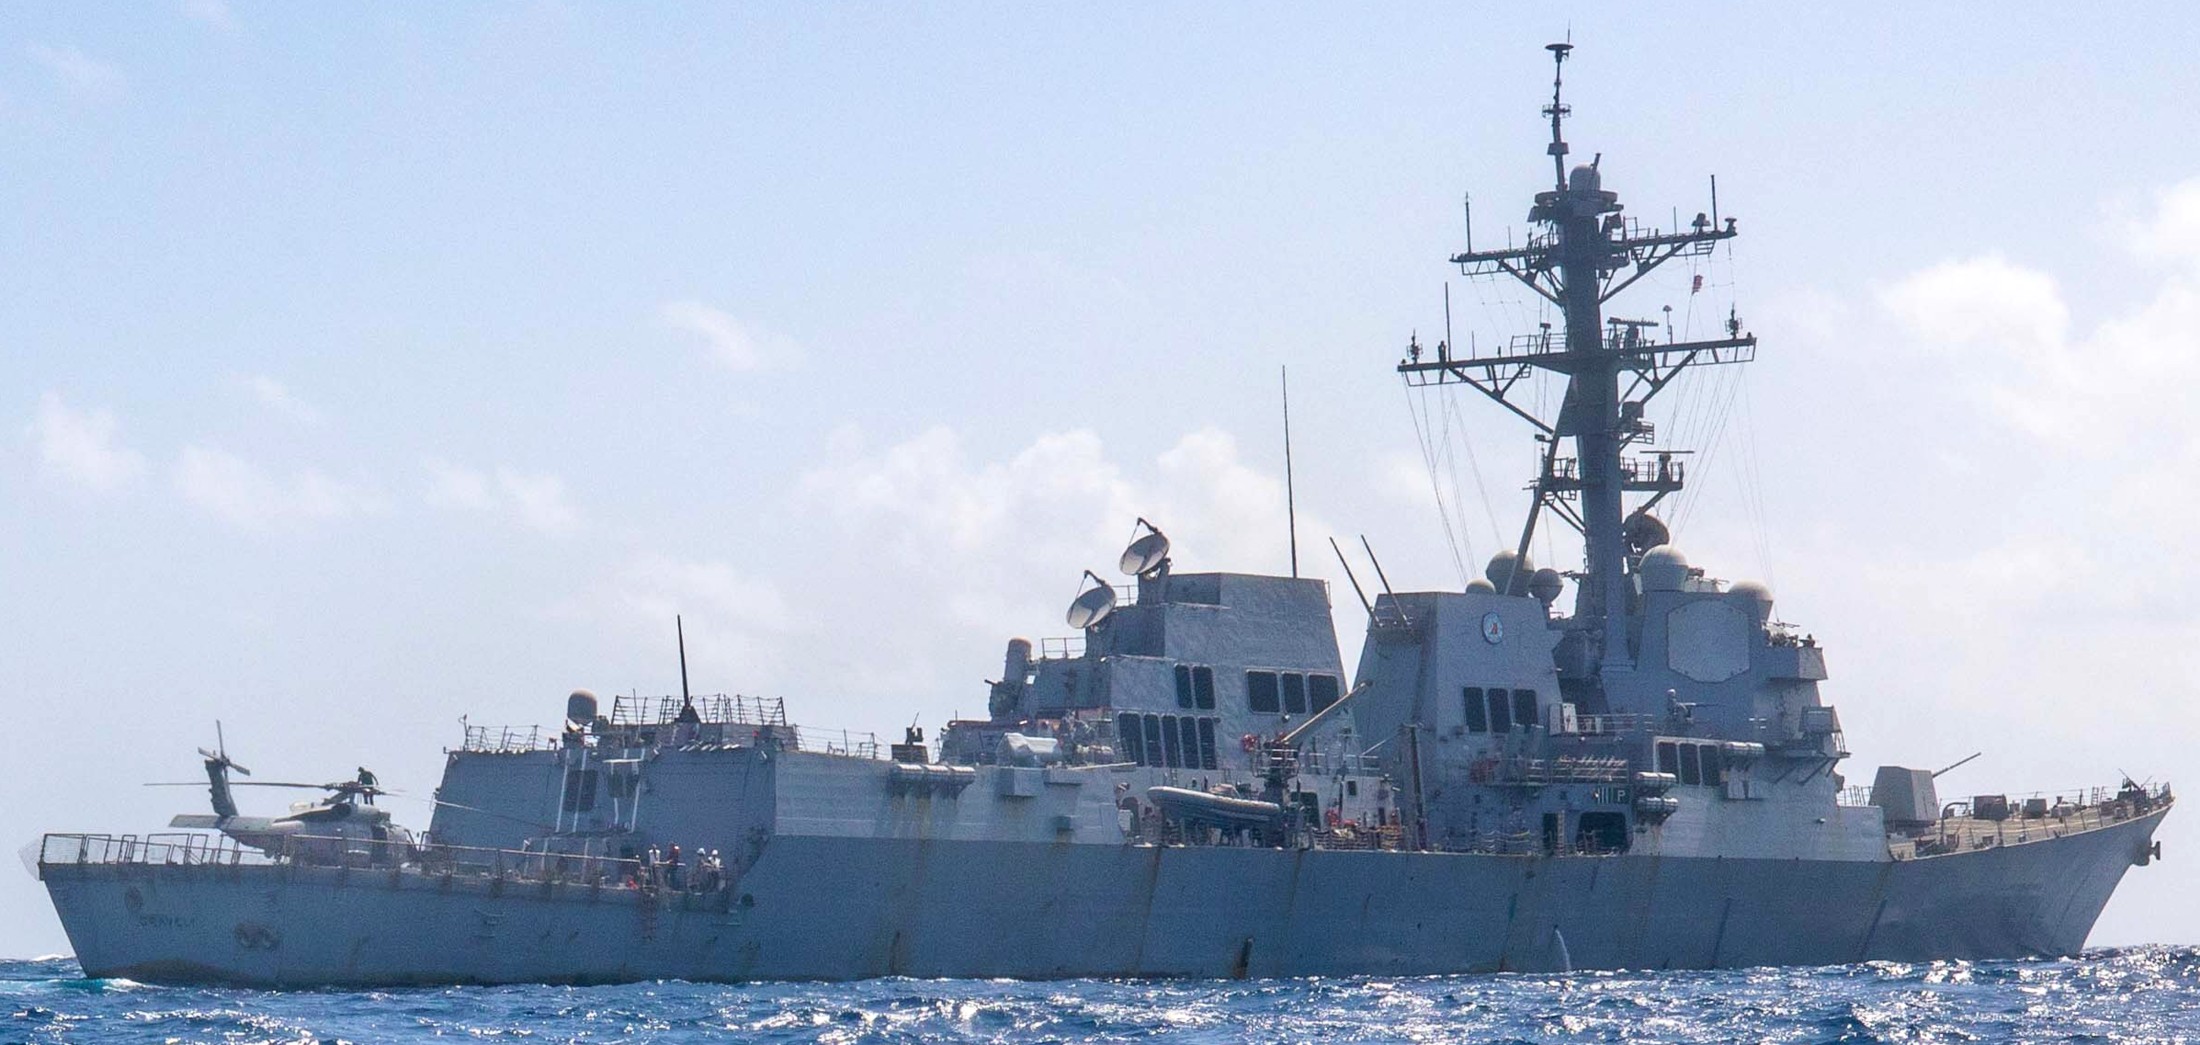 ddg-107 uss gravely arleigh burke class guided missile destroyer gulf of aden 2024 71